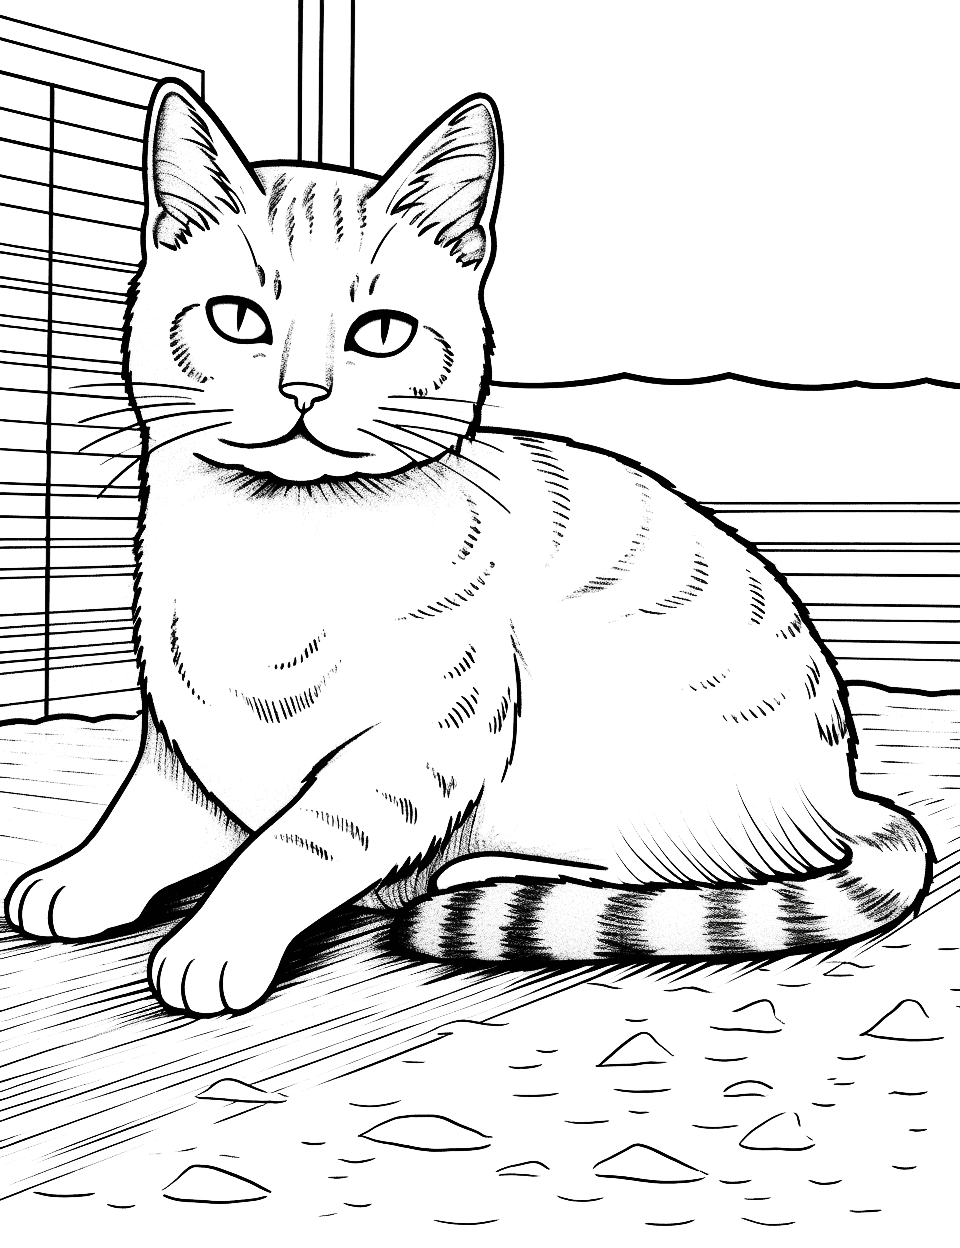 Realistic Tabby Cat Lounging in the Sun Coloring Page - A detailed and realistic depiction of a tabby cat lazily stretching in a patch of sunlight.